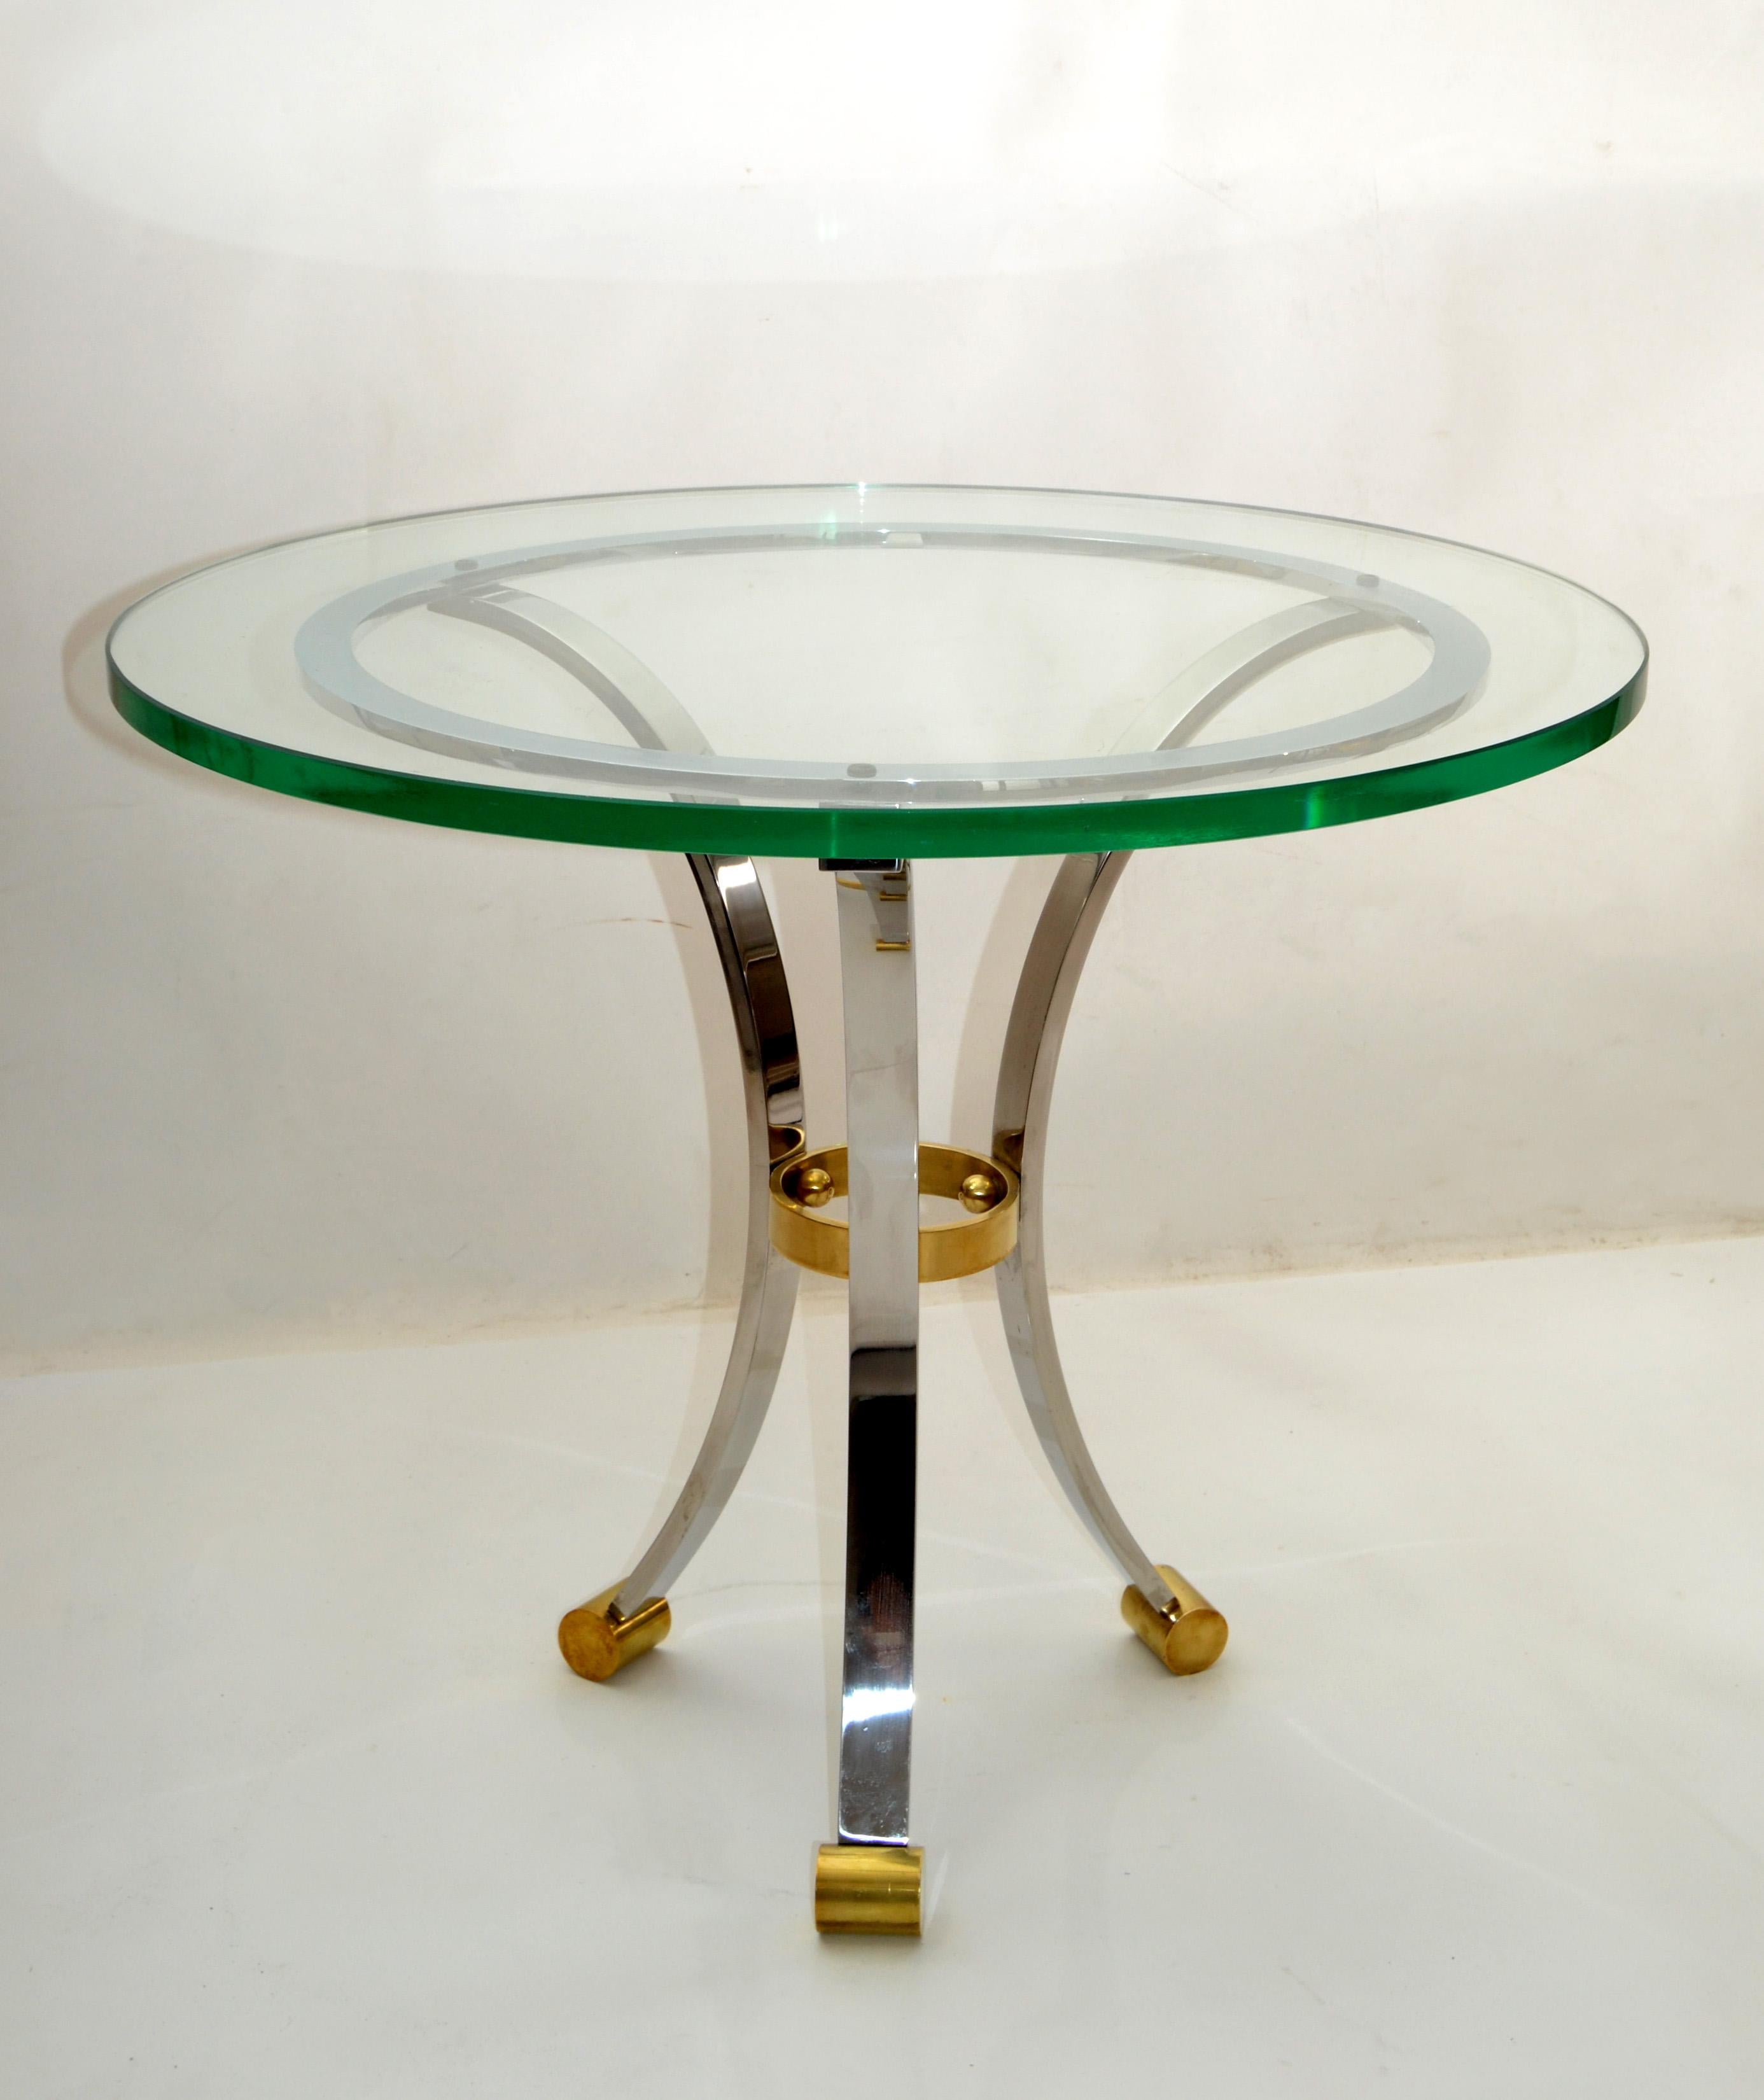 French Maison Jansen Round Glass, Brass & Steel Coffee Table Neoclassical, 1960s For Sale 2